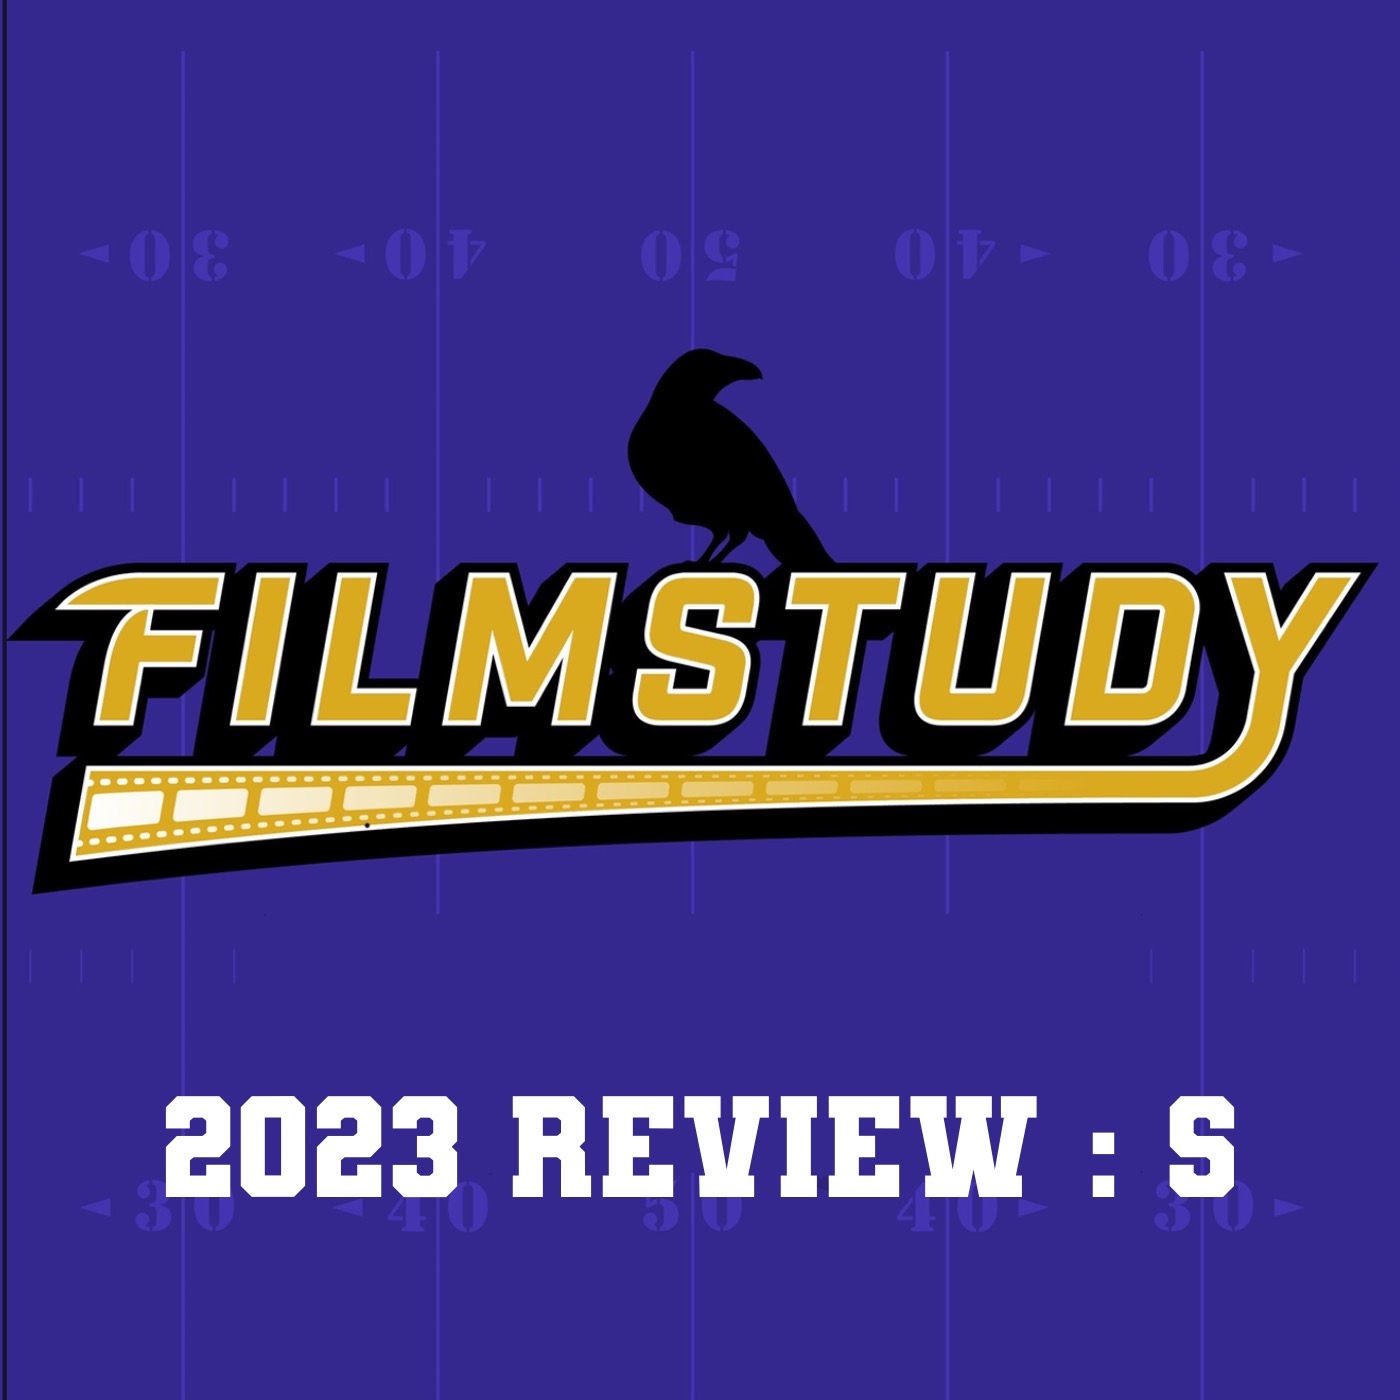 2023 Review - S